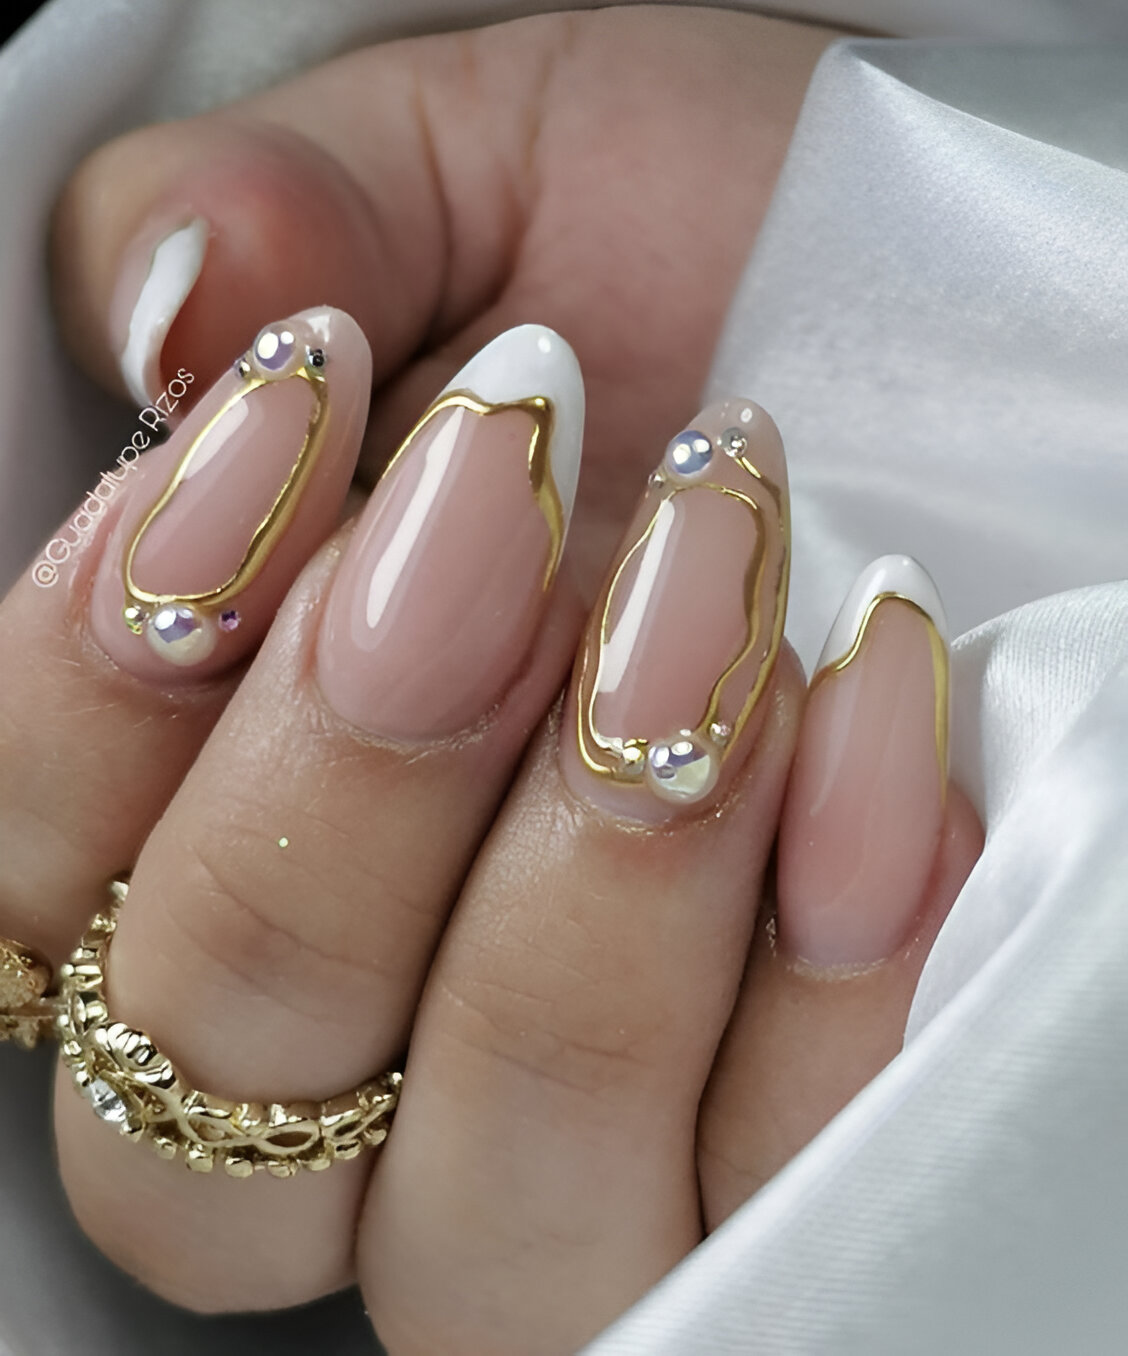 White Almond Manicures 5